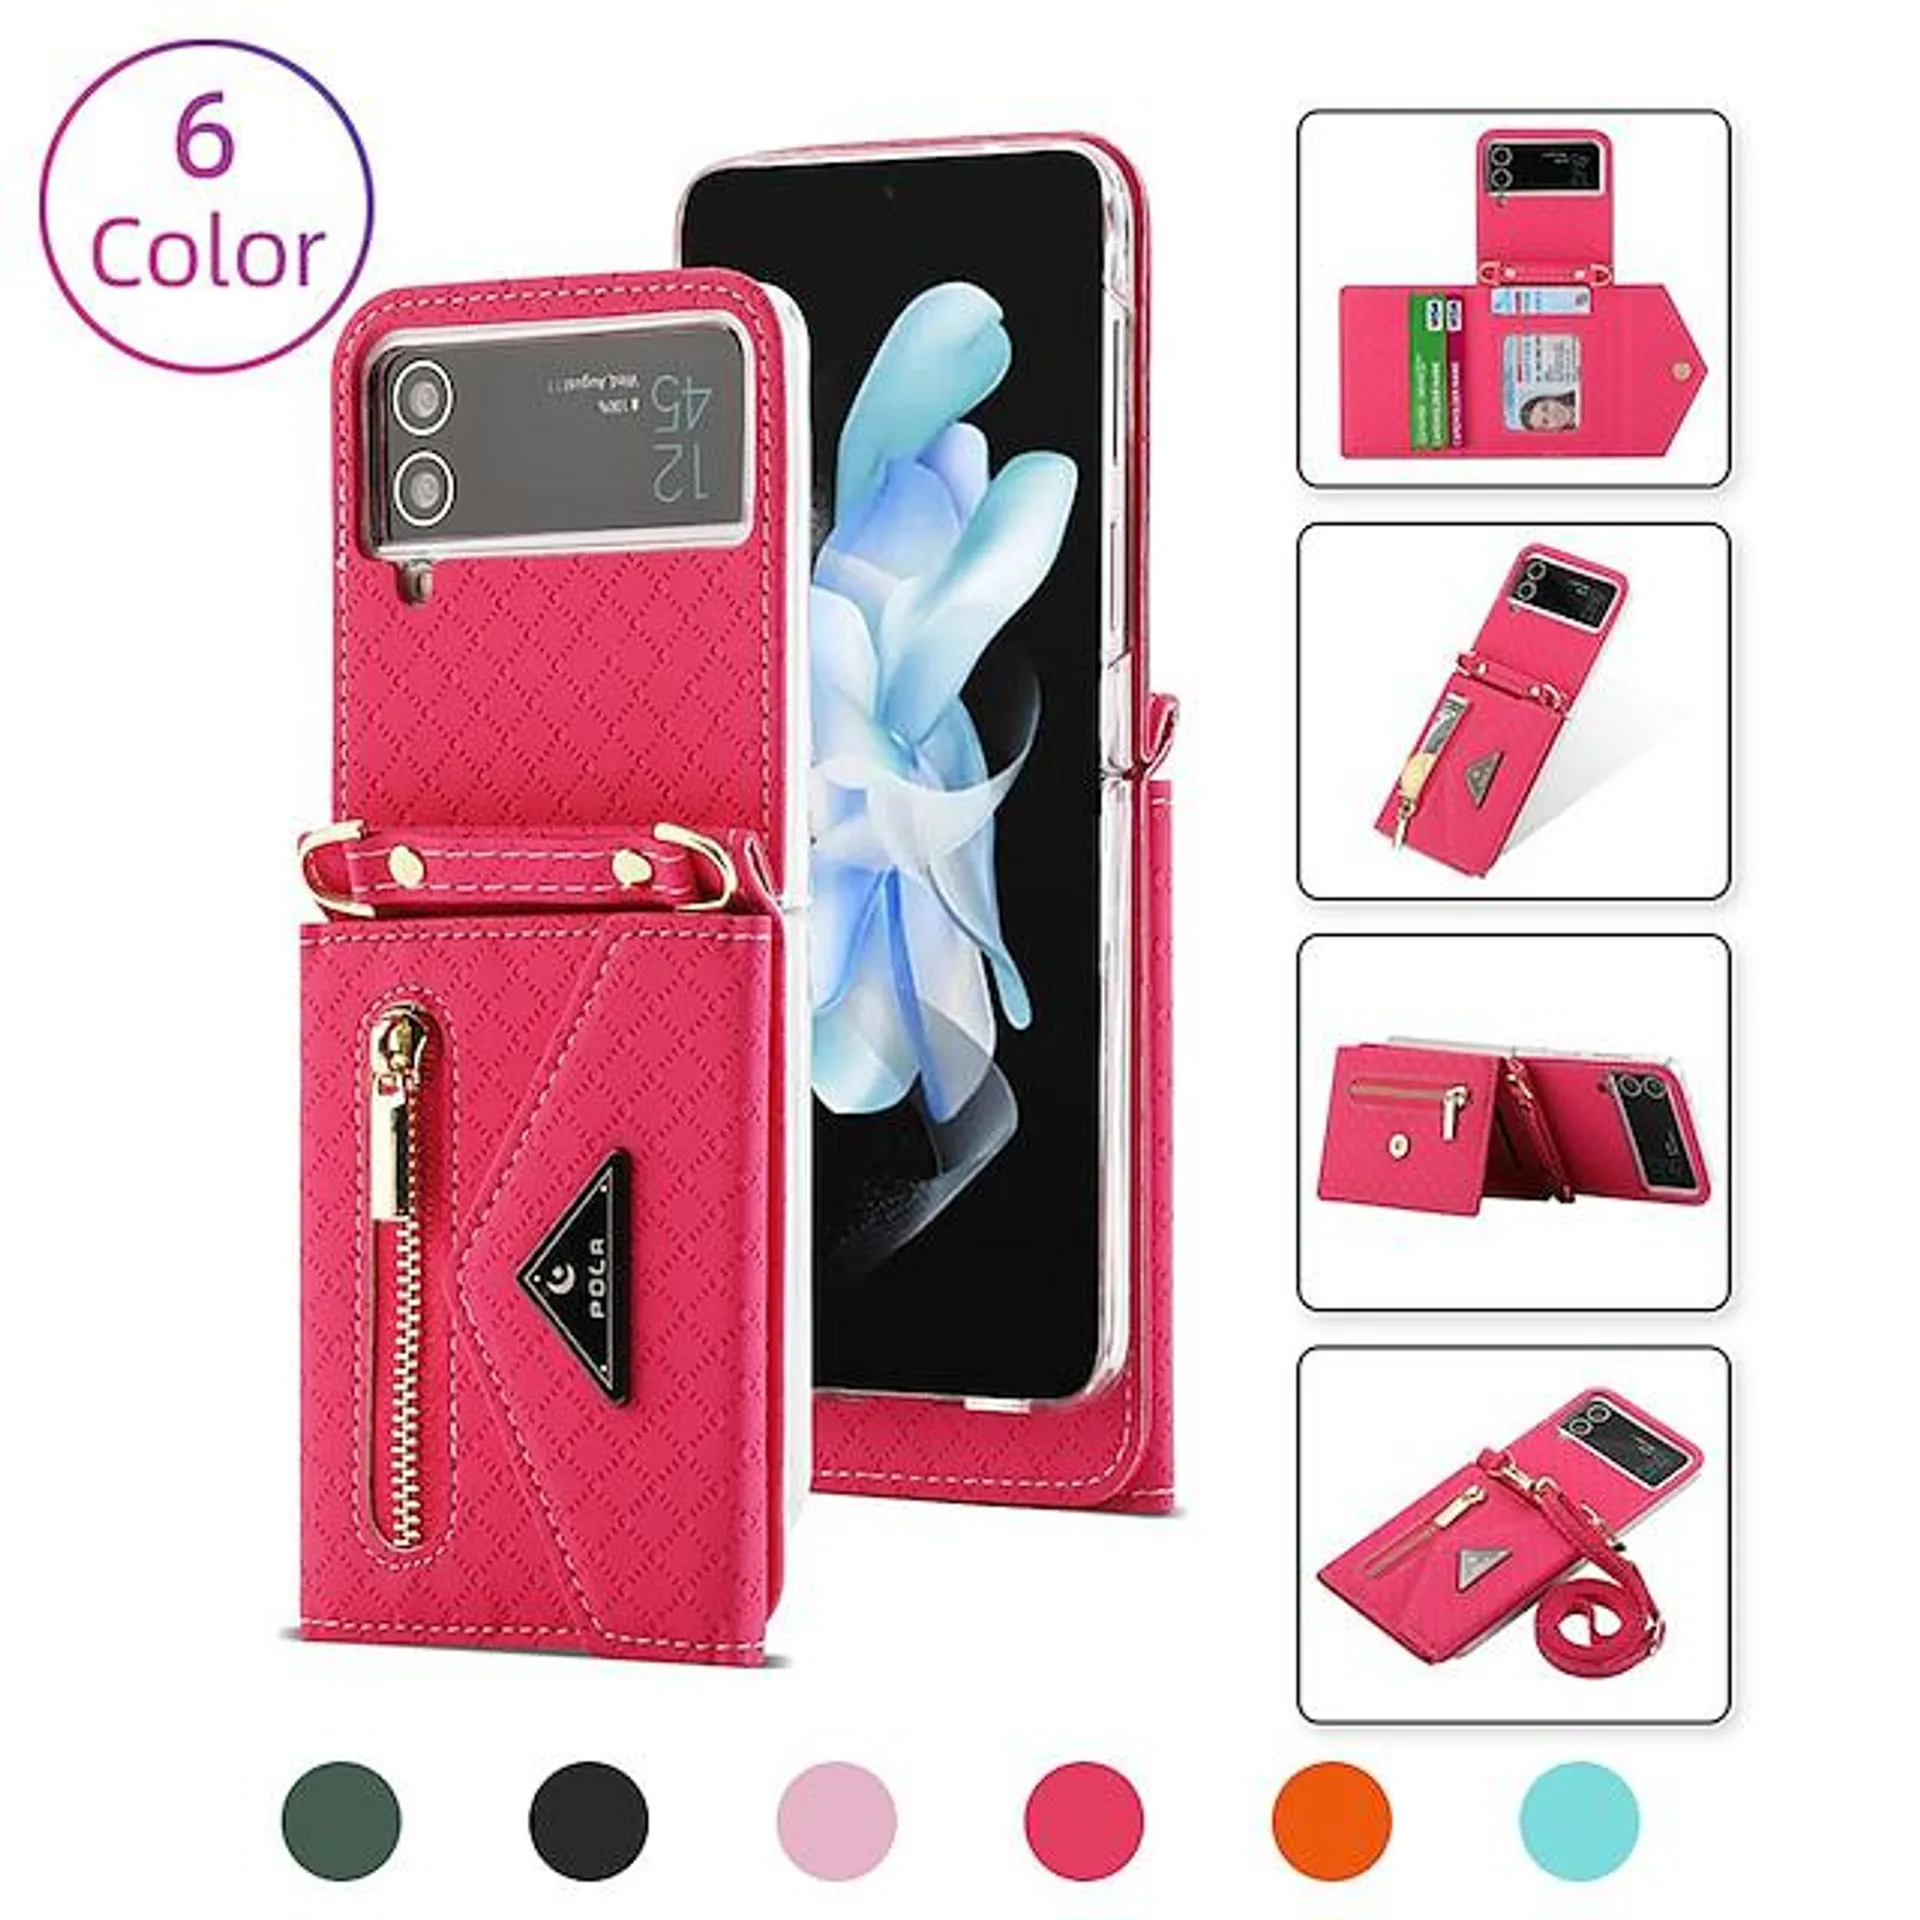 Phone Case For Samsung Galaxy Flip Z Flip 4 Z Flip 3 Full Body Protective with Removable Cross Body Strap Card Holder Slots Solid Colored PC PU Leather